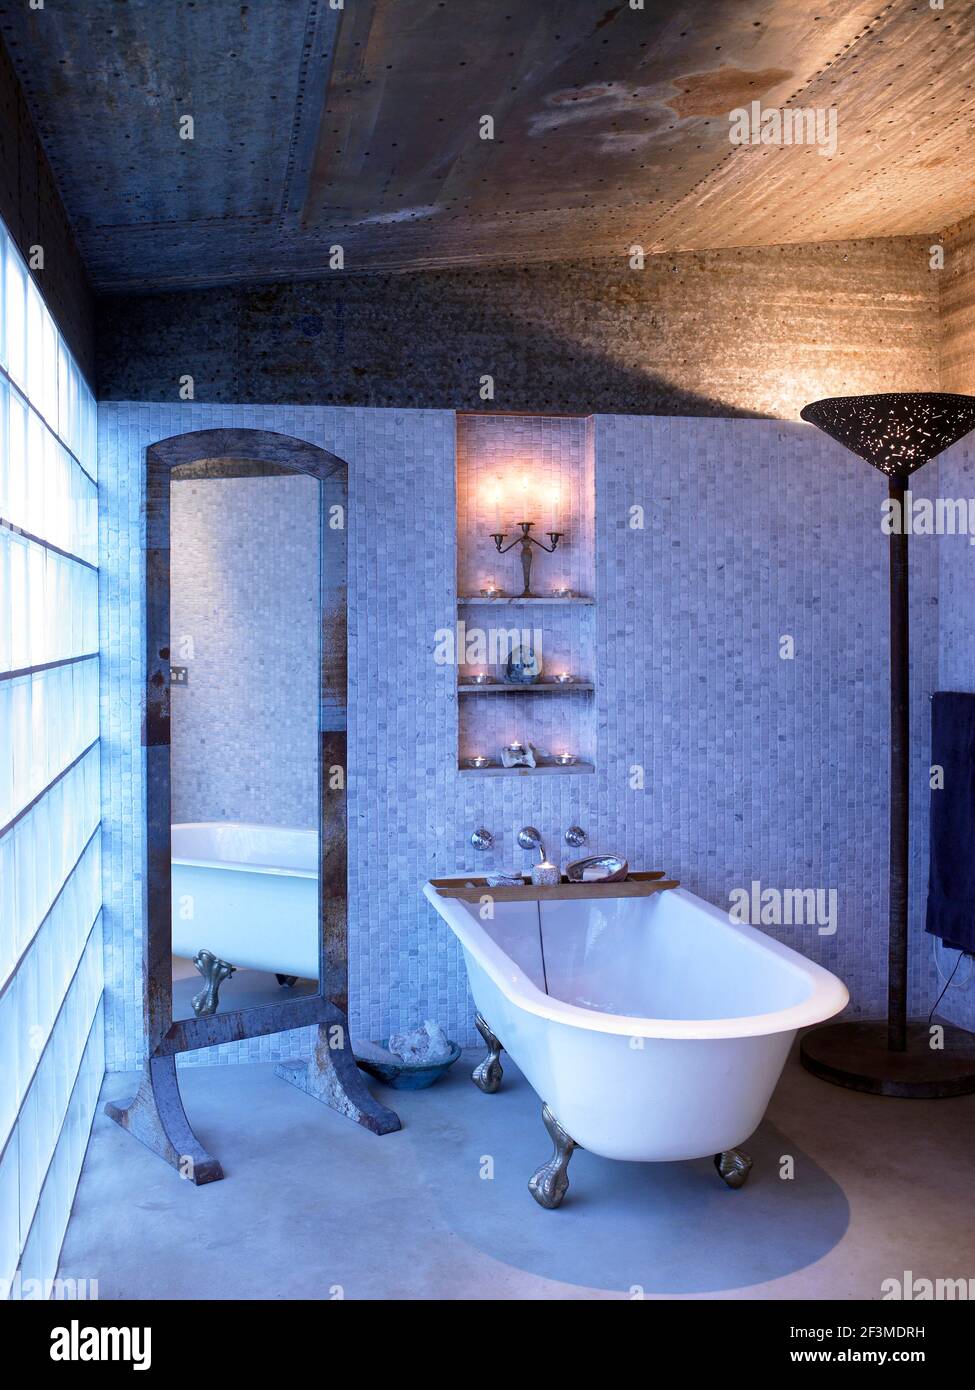 Glass wall in bathroom with free standing bathtub, full length standing mirror and large up lighting standard lamp in residential house, Australia. Stock Photo